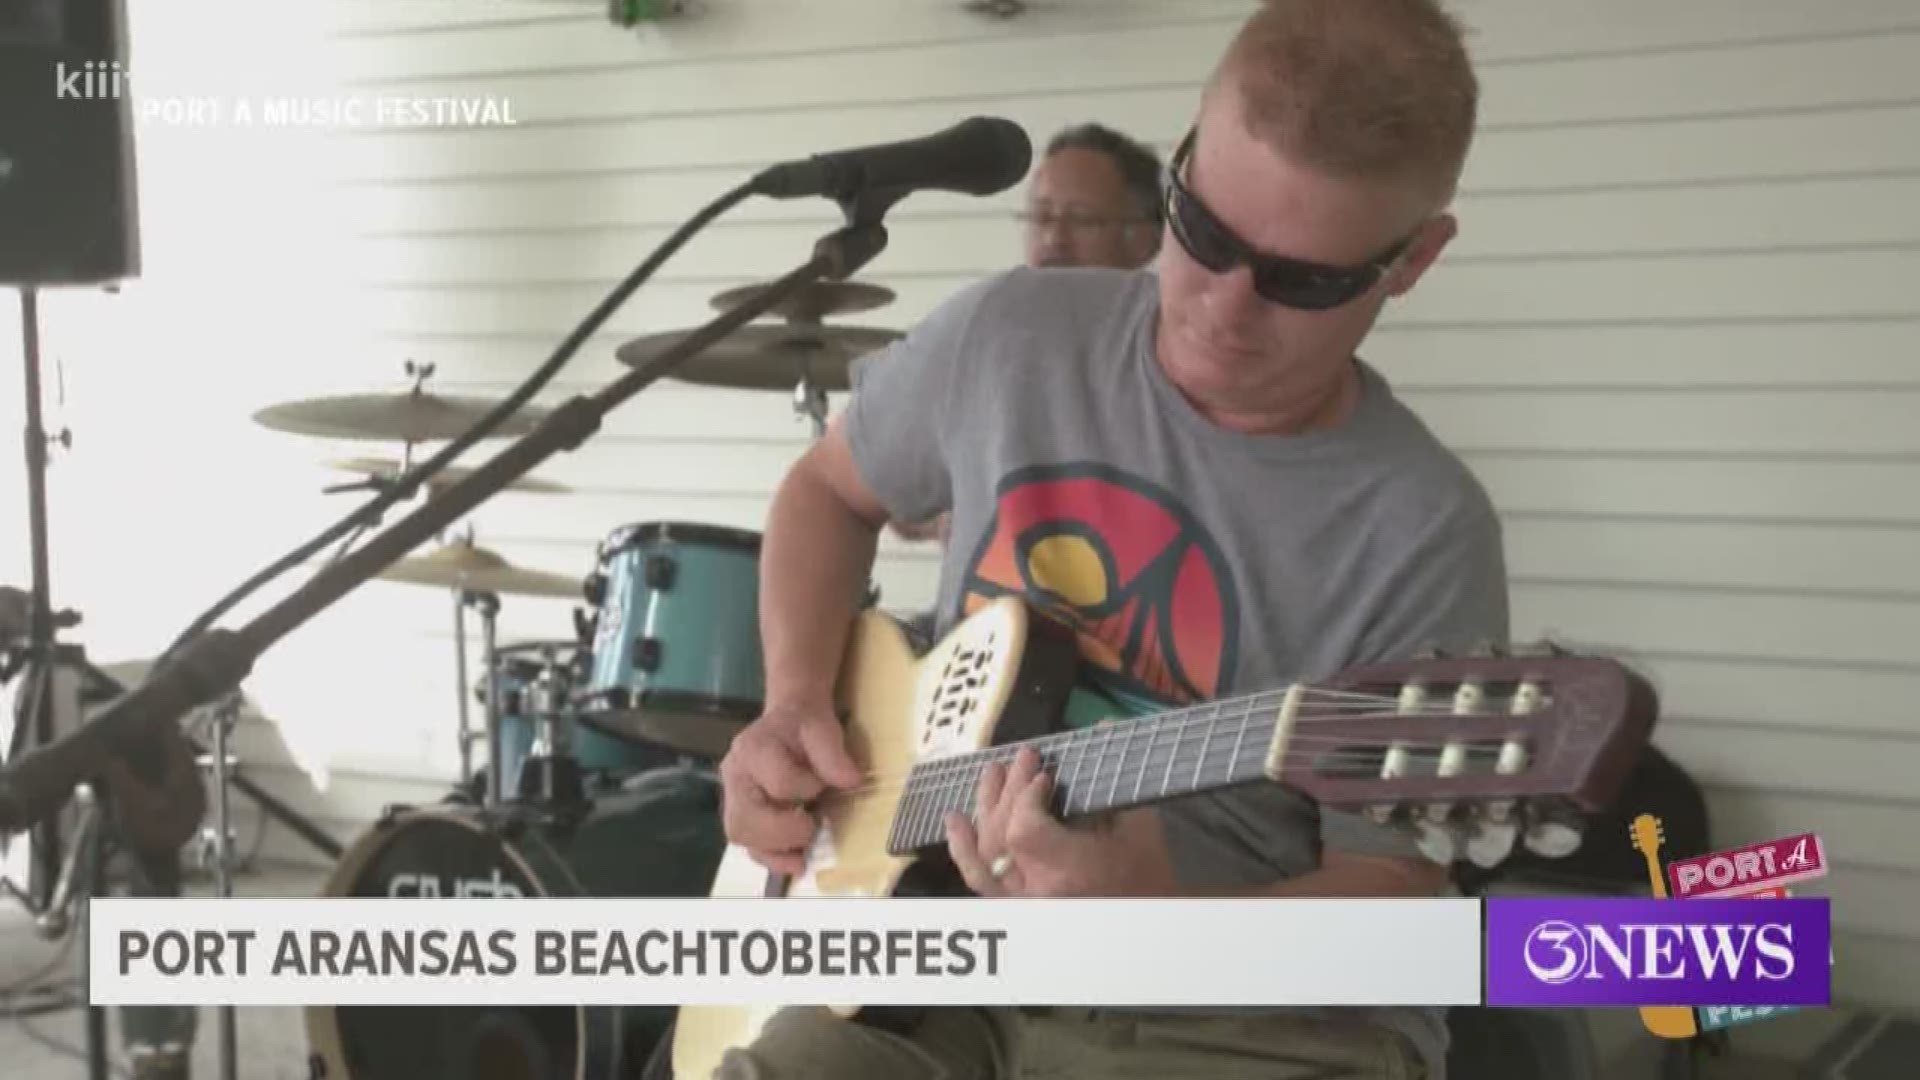 Beachtoberfest is a month-long series of events and activities designed to highlight the special qualities that make Port Aransas unique.